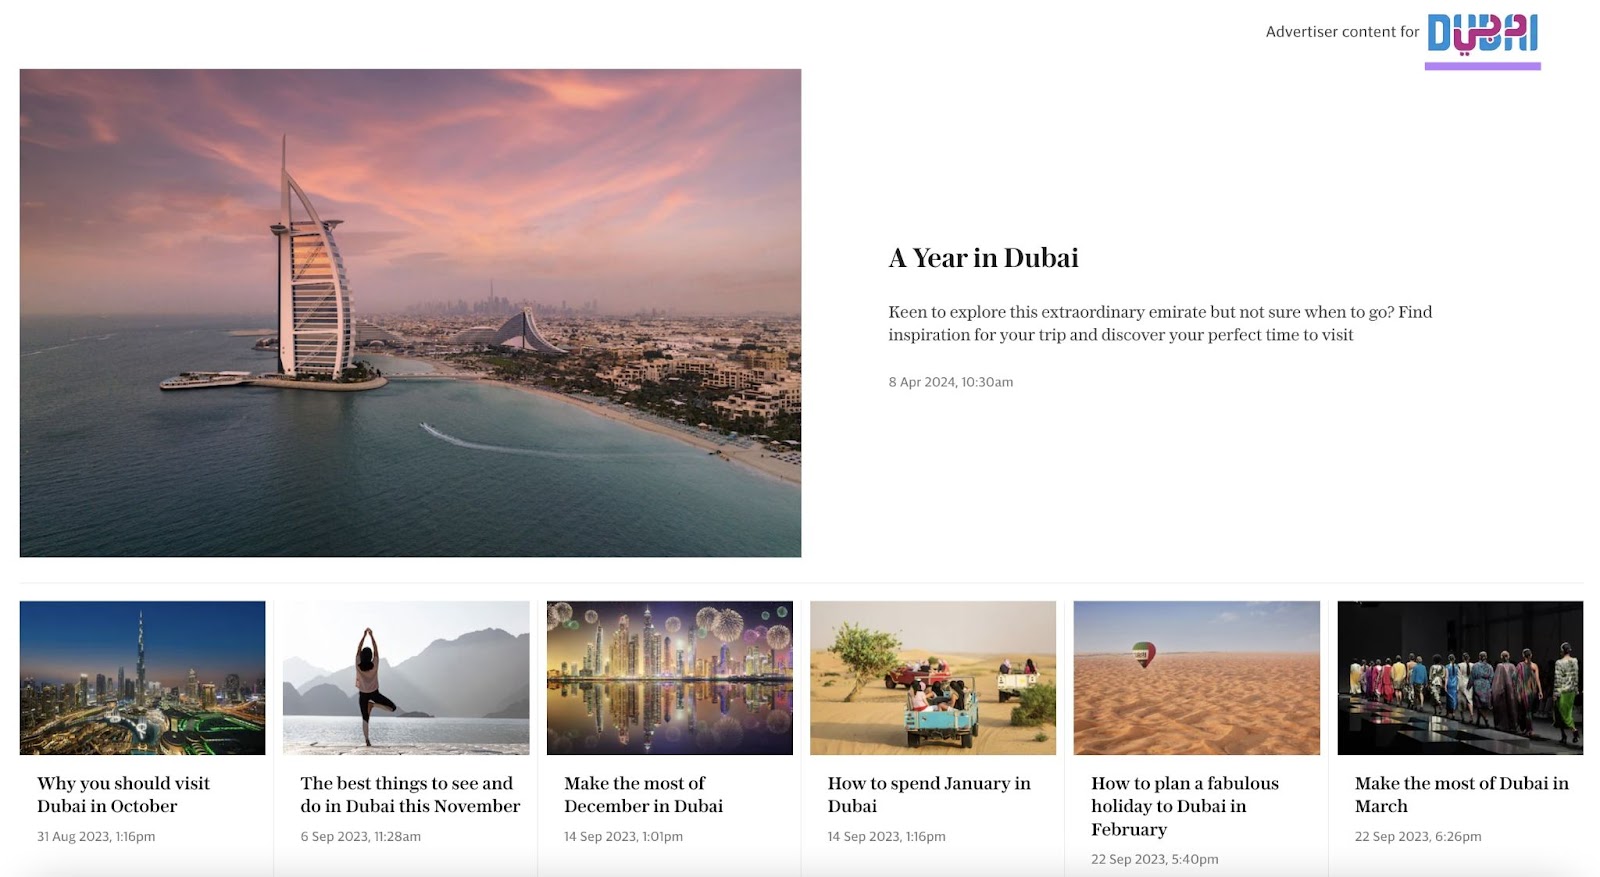 Dubai tourism board advert with 7 blog post titles and accompanying images showing scenes from Dubai